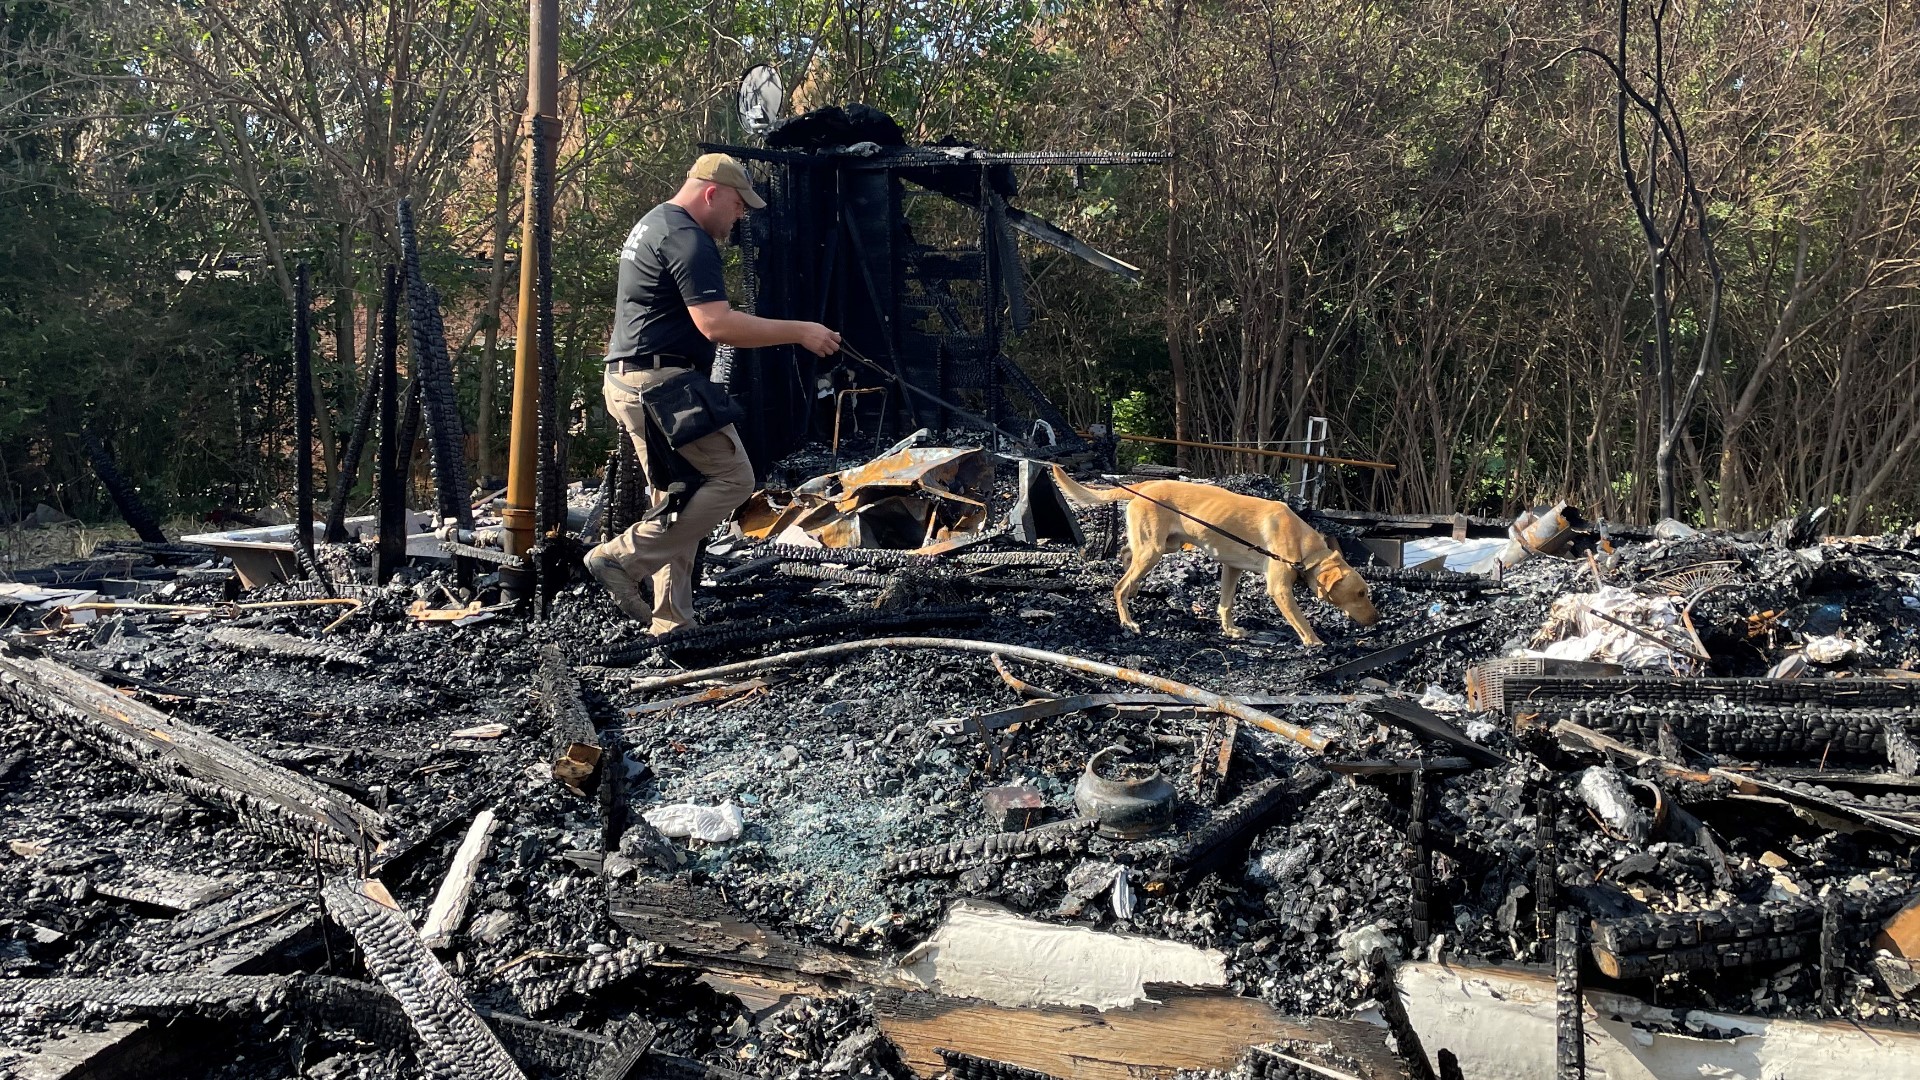 Crews had to battle multiple fires on June 30. They were initially called out to a house fire near Orange Petite Academy, a former daycare center, on Mason Road.